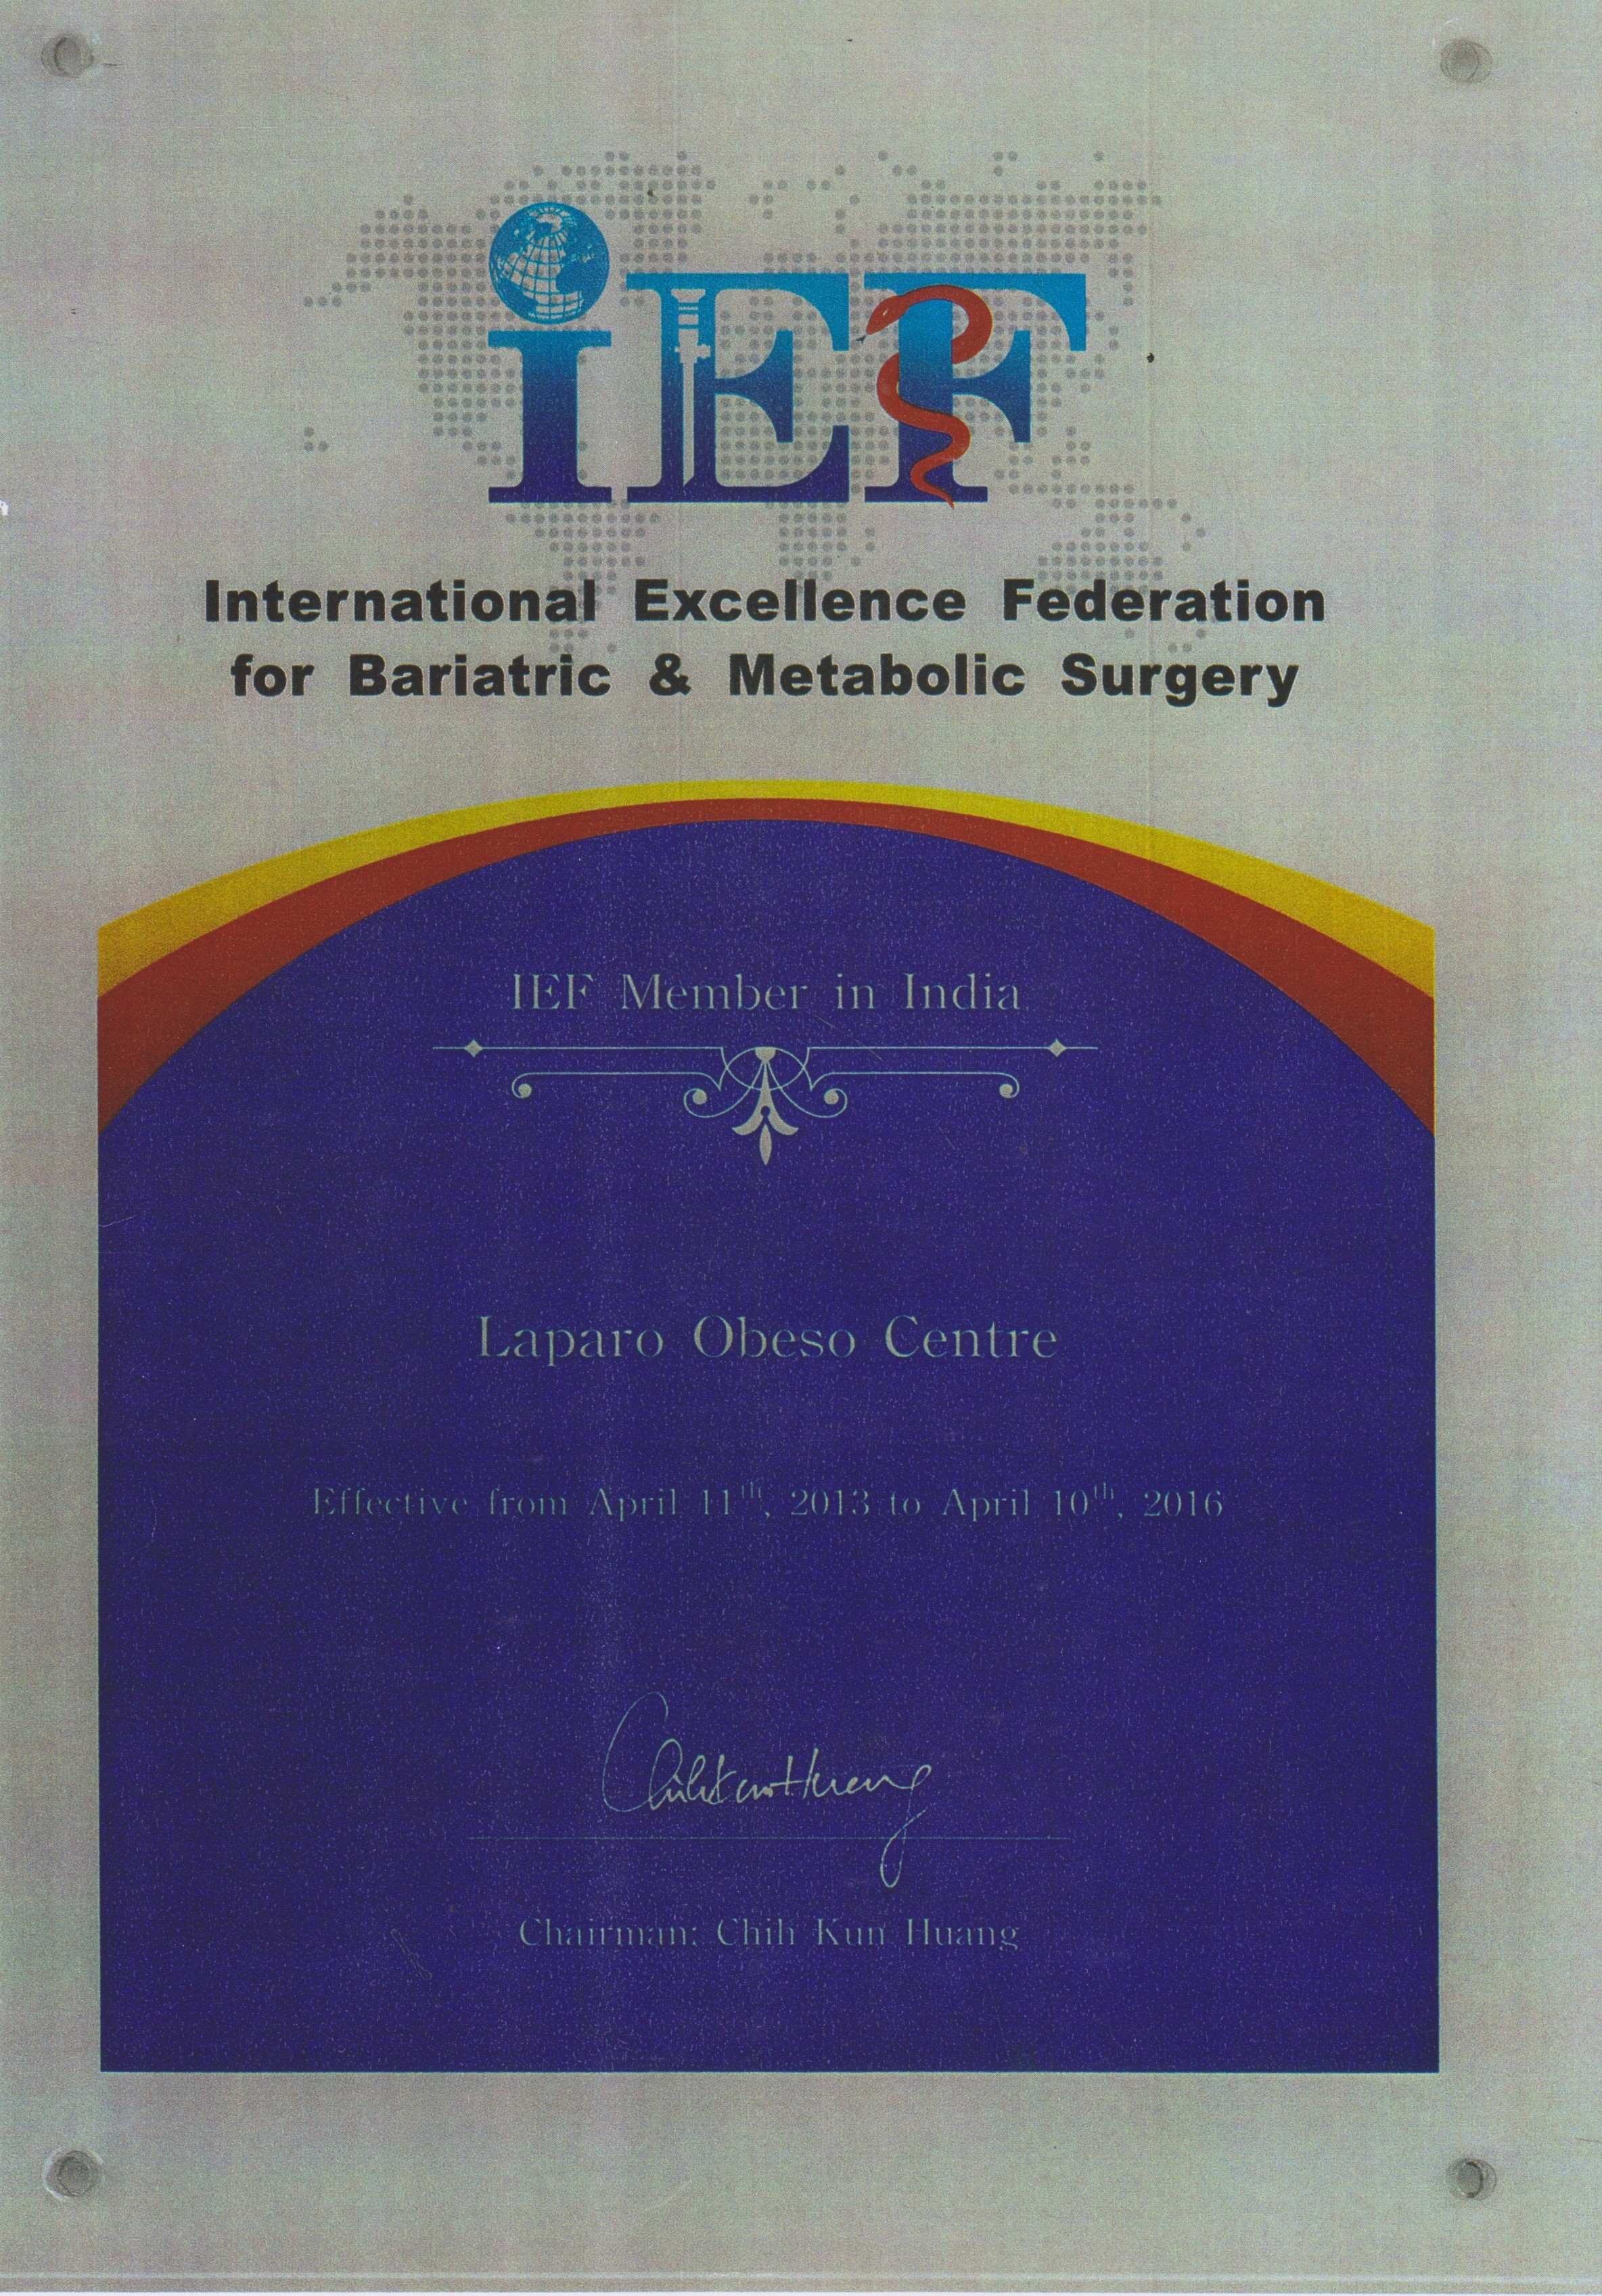 Laparo Obeso Centre is the International Excellence Federation (IEF) Member, India from 2013-2016.